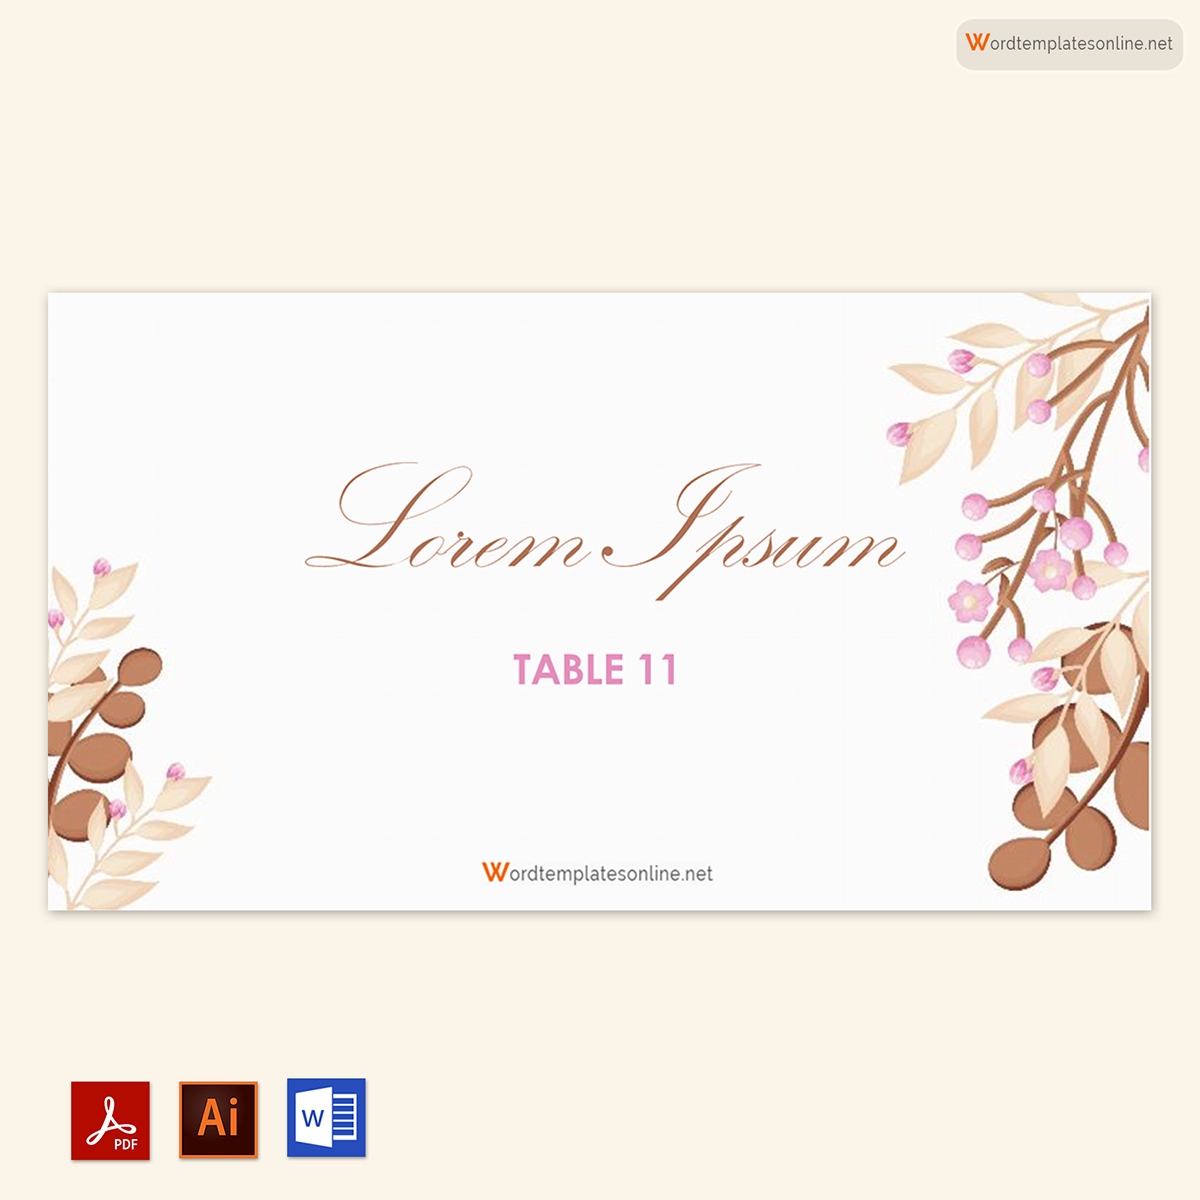 Free Printable Place Card Template - Editable Word Document